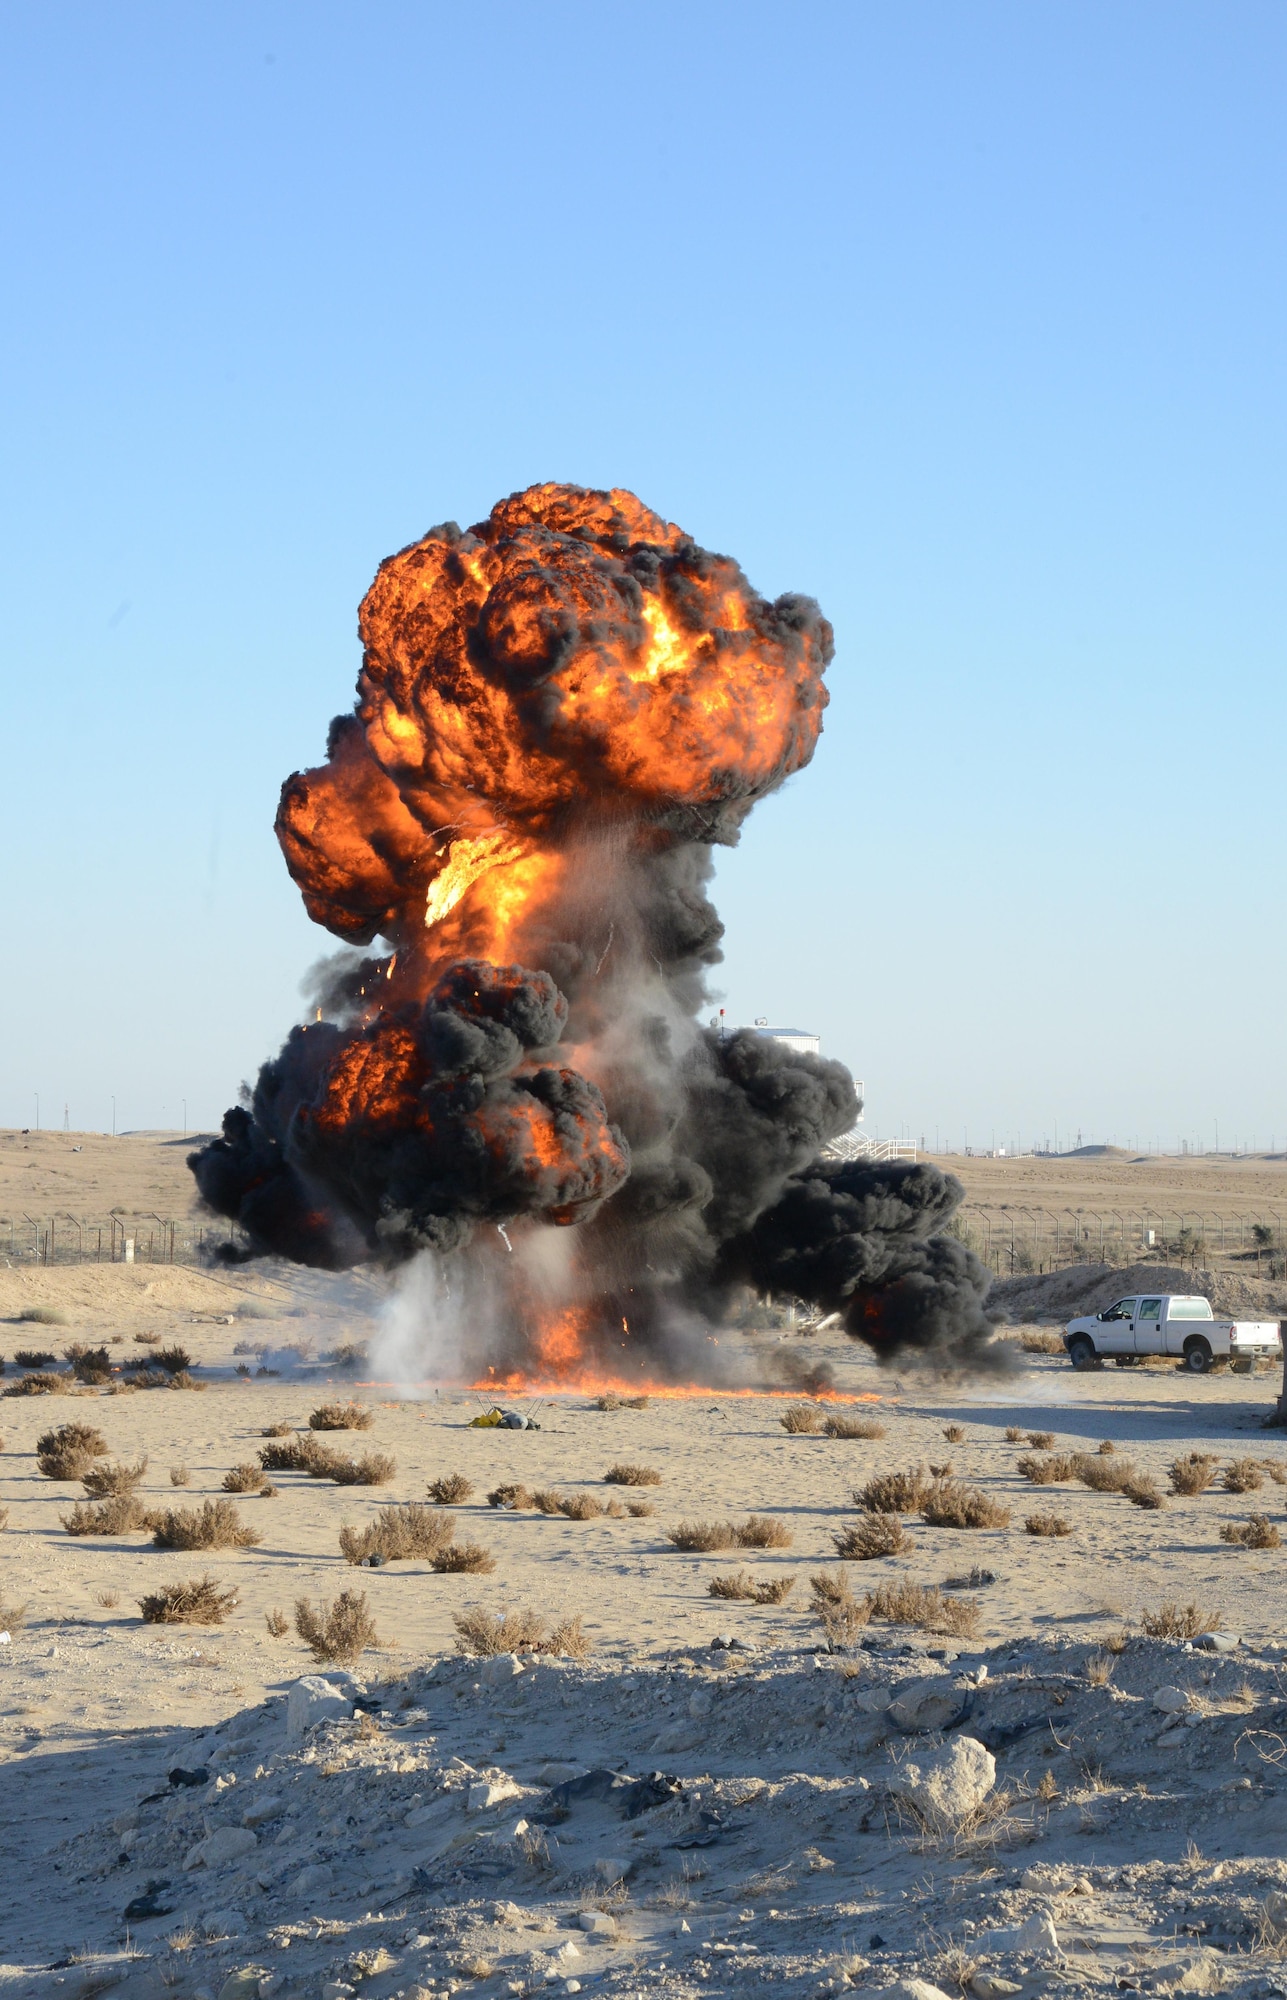 A plume of fire and smoke emerges from a controlled detonation conducted by 386th Expeditionary Civil Engineer Squadron Explosive Ordnance Disposal technicians at an undisclosed location in Southwest Asia March 6, 2015.  EOD Airmen perform controlled explosions as part of training and operations in order to dispose of unserviceable or unexploded munitions. EOD Airmen are also responsible for locating and neutralizing potential explosive devices, as well as clearing the airfield of hazardous munitions. (U.S. Air Force photo by 1st Lt. Sarah Ruckriegle)